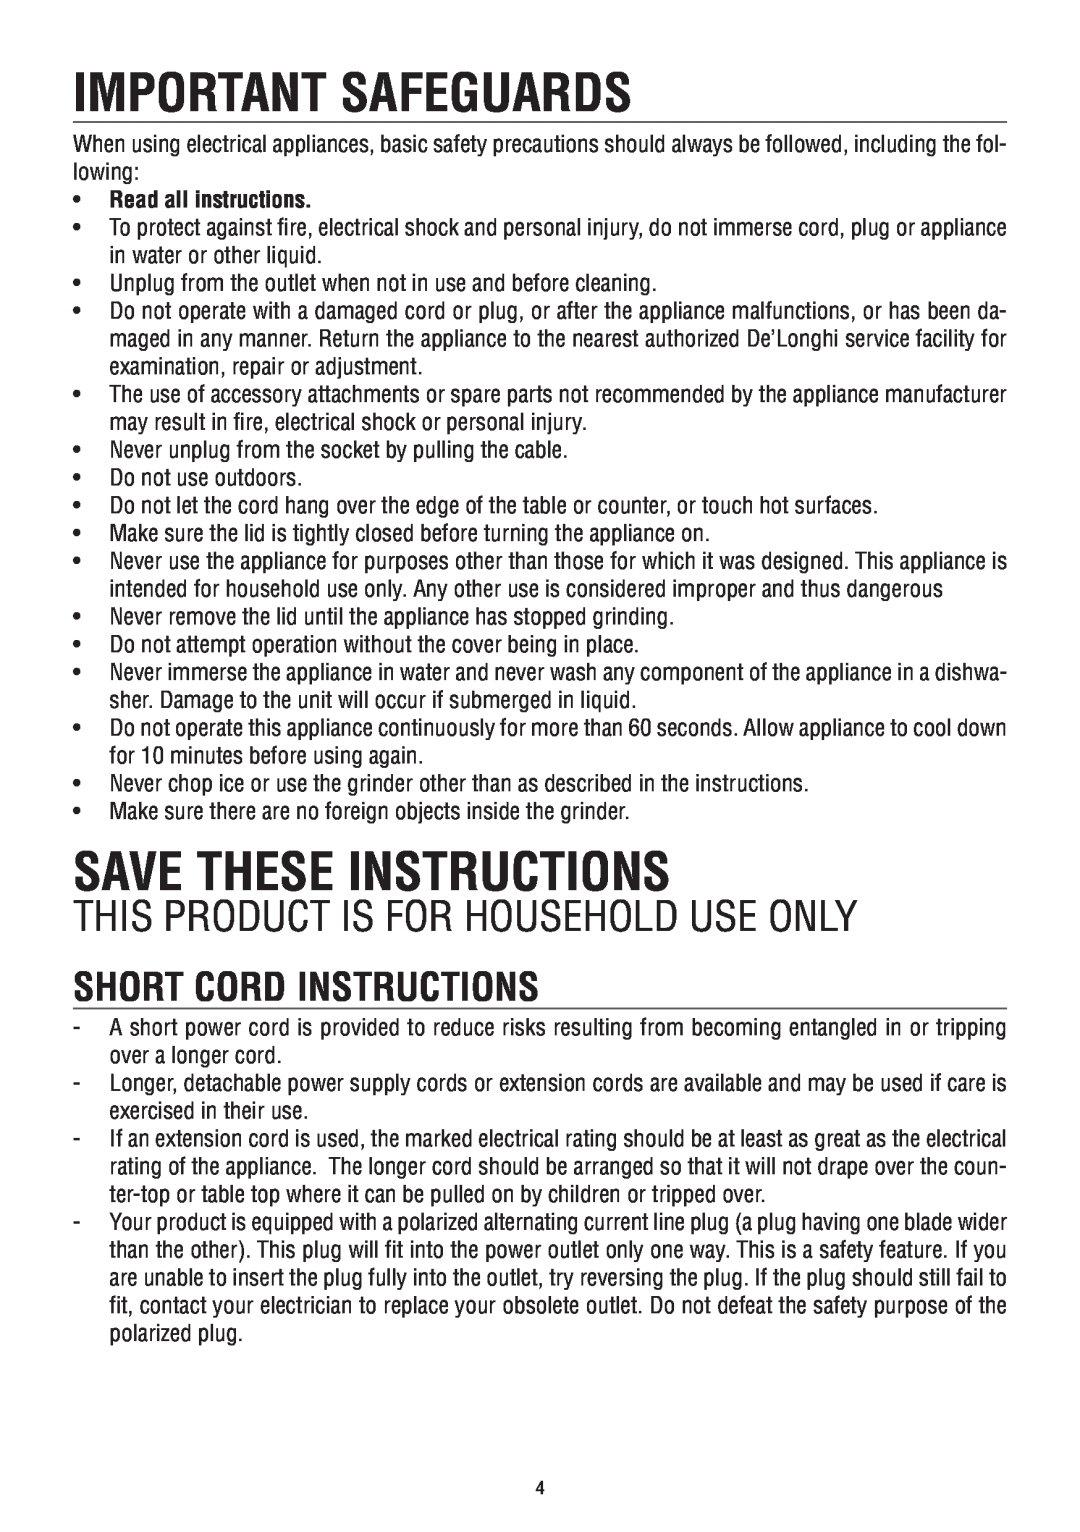 DeLonghi KG49 manual Short Cord Instructions, Read all instructions, Important Safeguards, Save These Instructions 